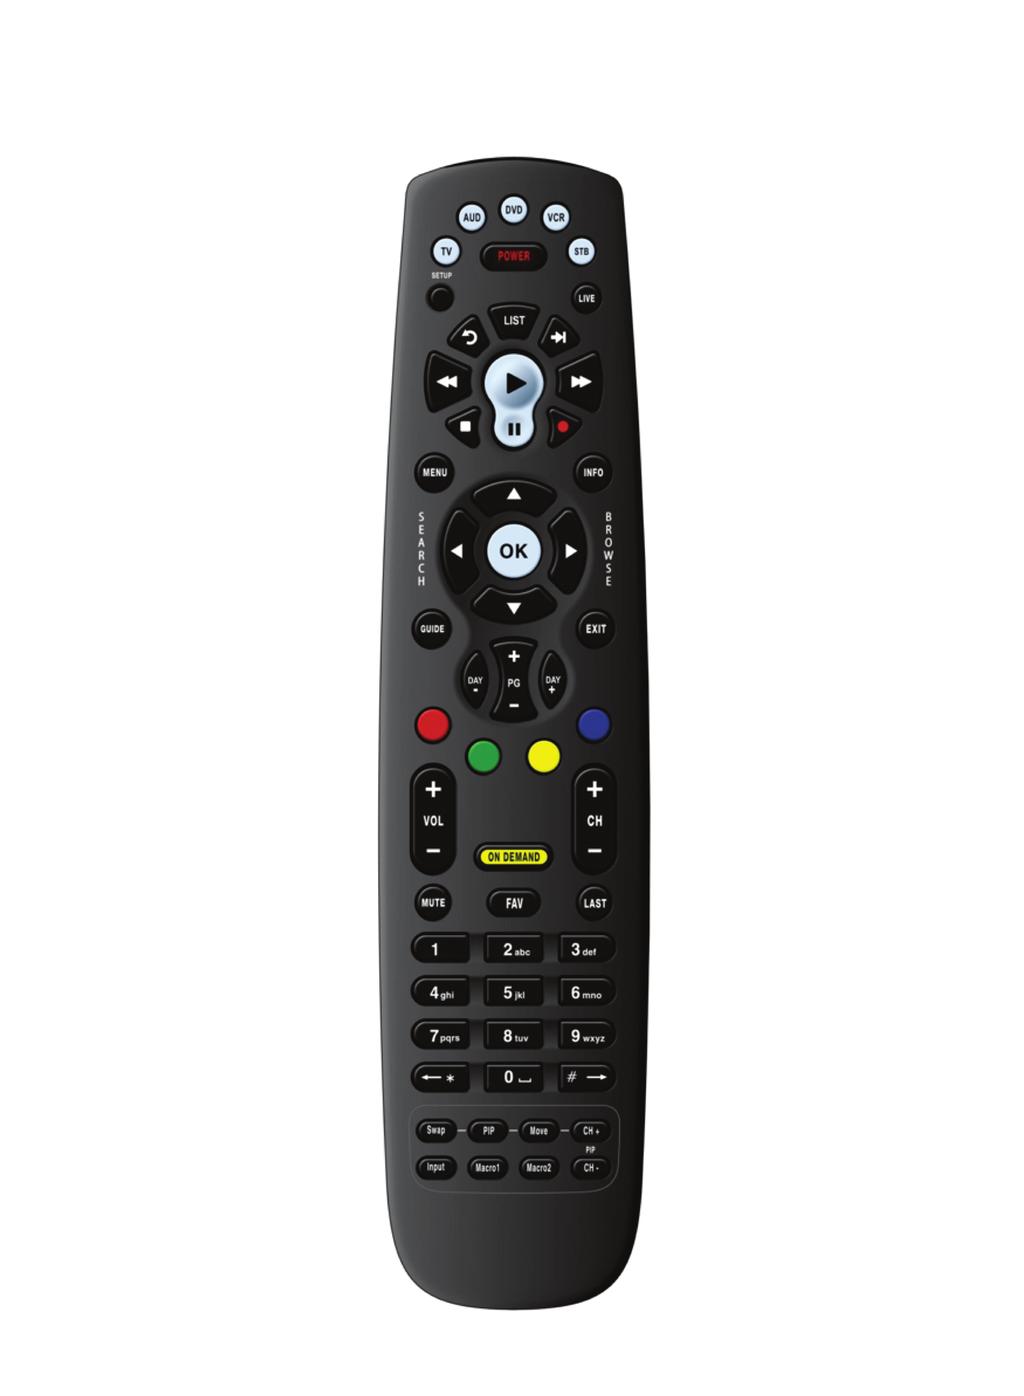 Remote Control Control the Remote TV, AUD, DVD, VCR, STB Use one remote to control multiple devices. Setup Use for programming sequences of devices controlled by the remote.